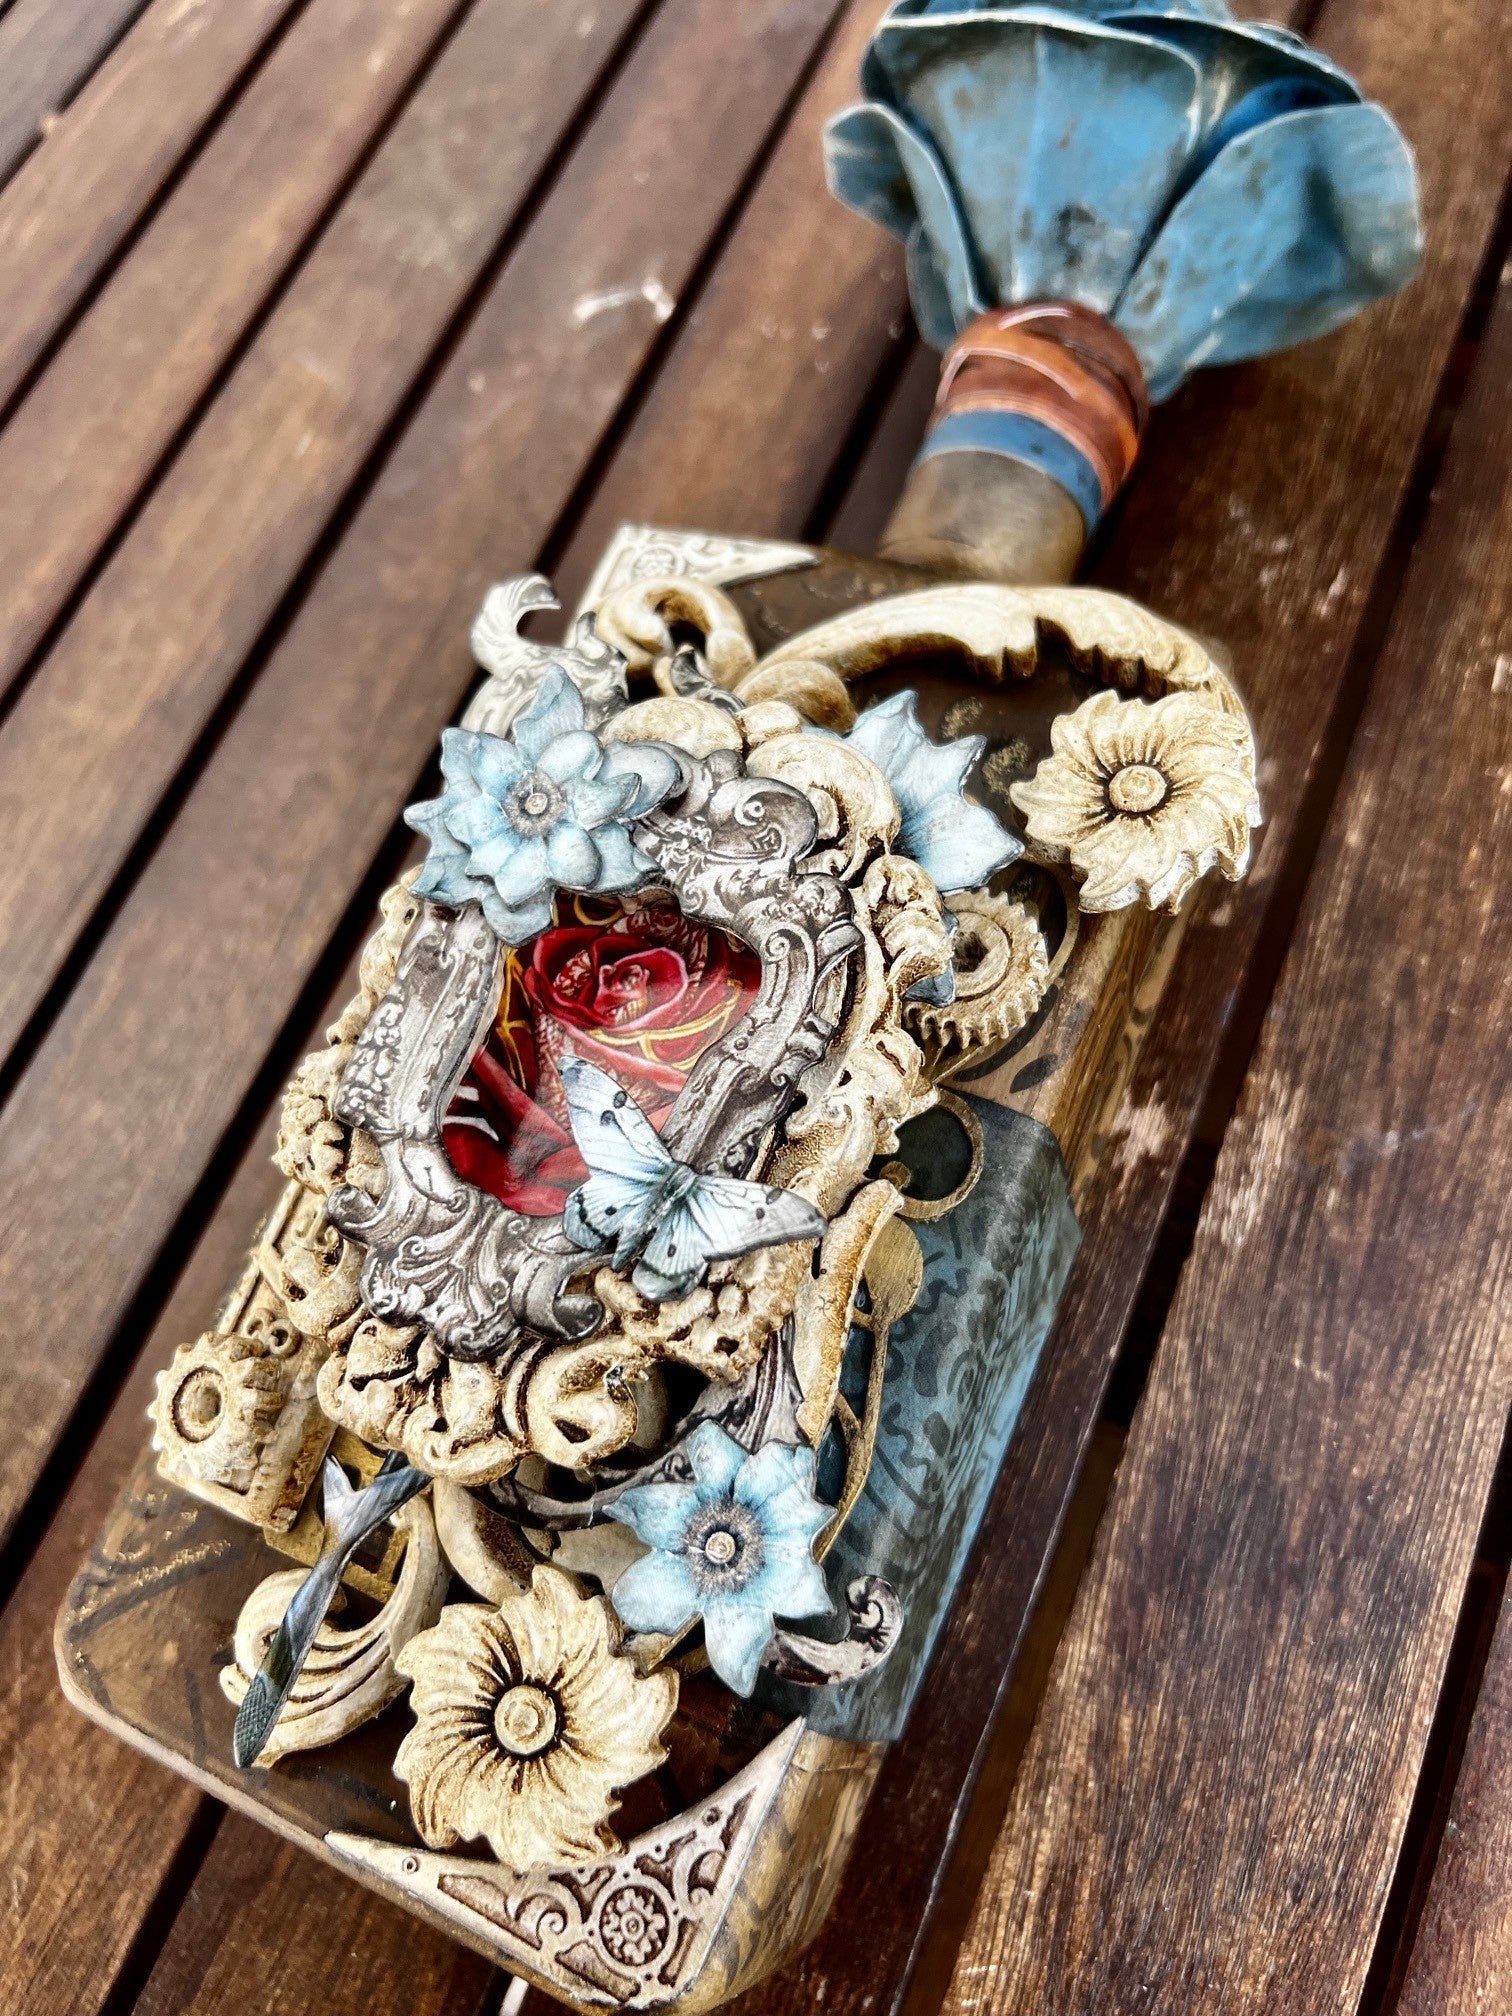 Antonis Workshop - Blue Rose Bottle Project - Friday 9th August   9am to 2pm